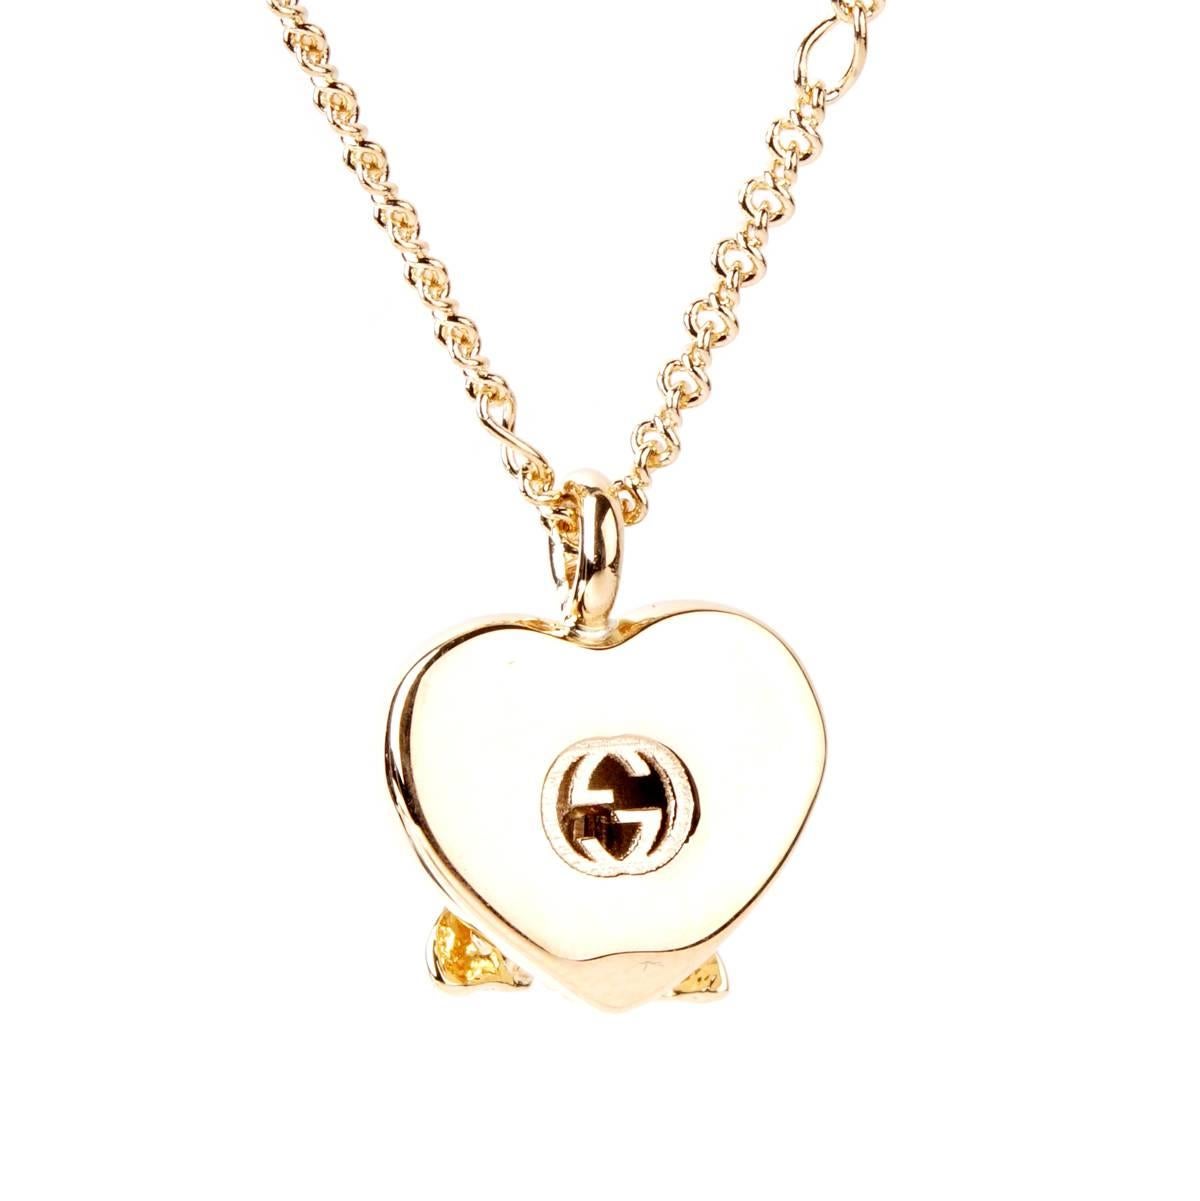 Get in touch with nature with this fabulous Gucci necklace from the Le Marche des Merveilles collection, featuring a Bee motif in 18k yellow gold and matching 18k yellow gold adjustable necklace.

Necklace Length: 19